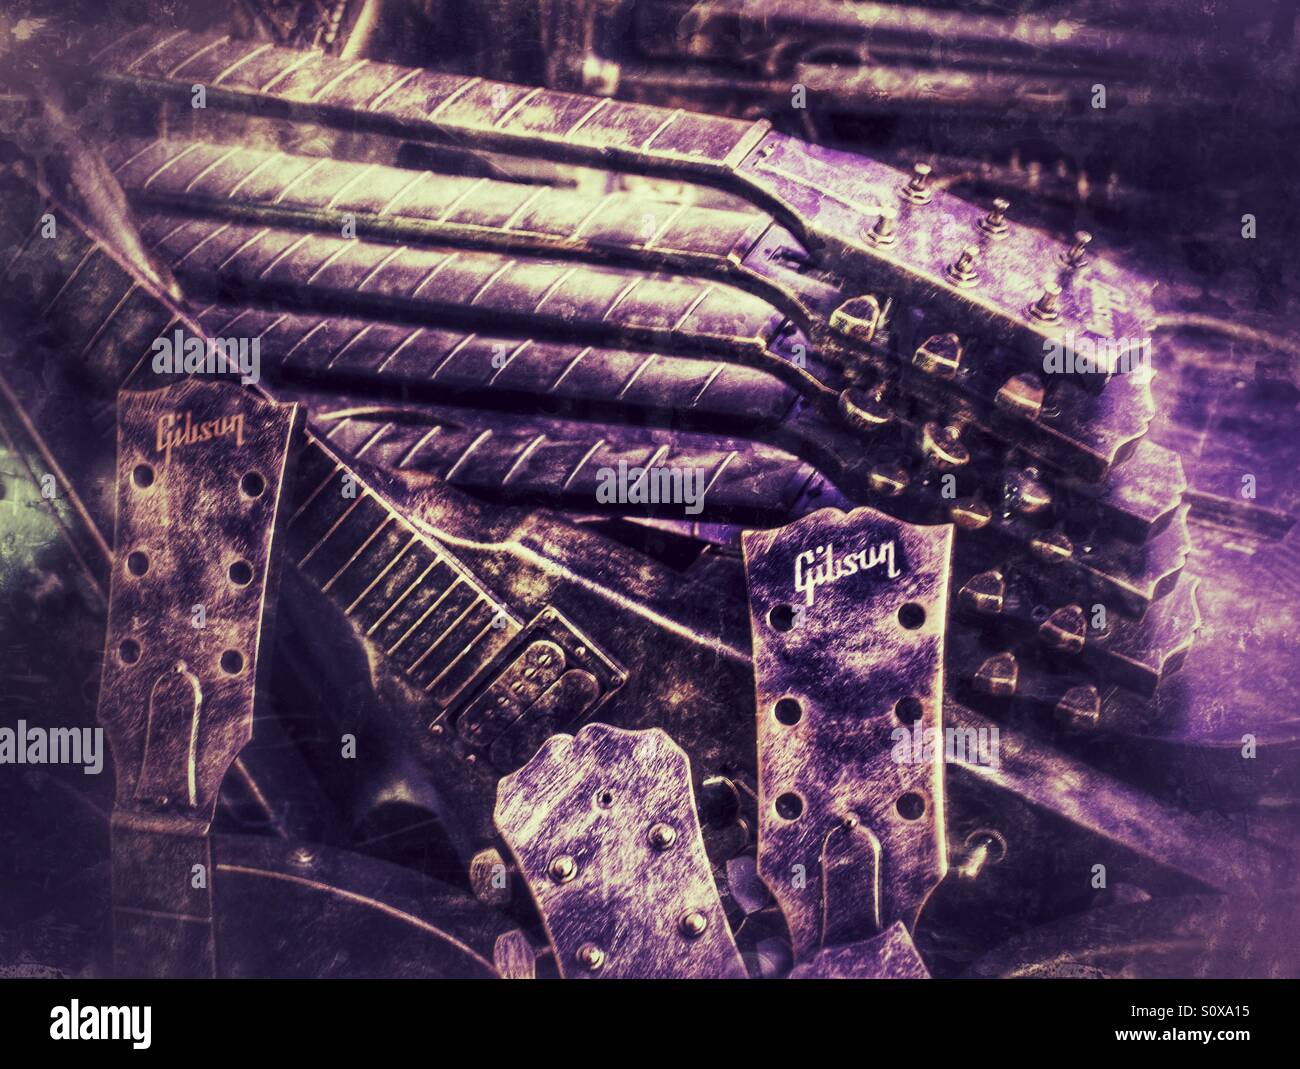 A pile of discarded Gibson electric guitars. Old musical instruments piled up in a heap with a purple hue. Stock Photo